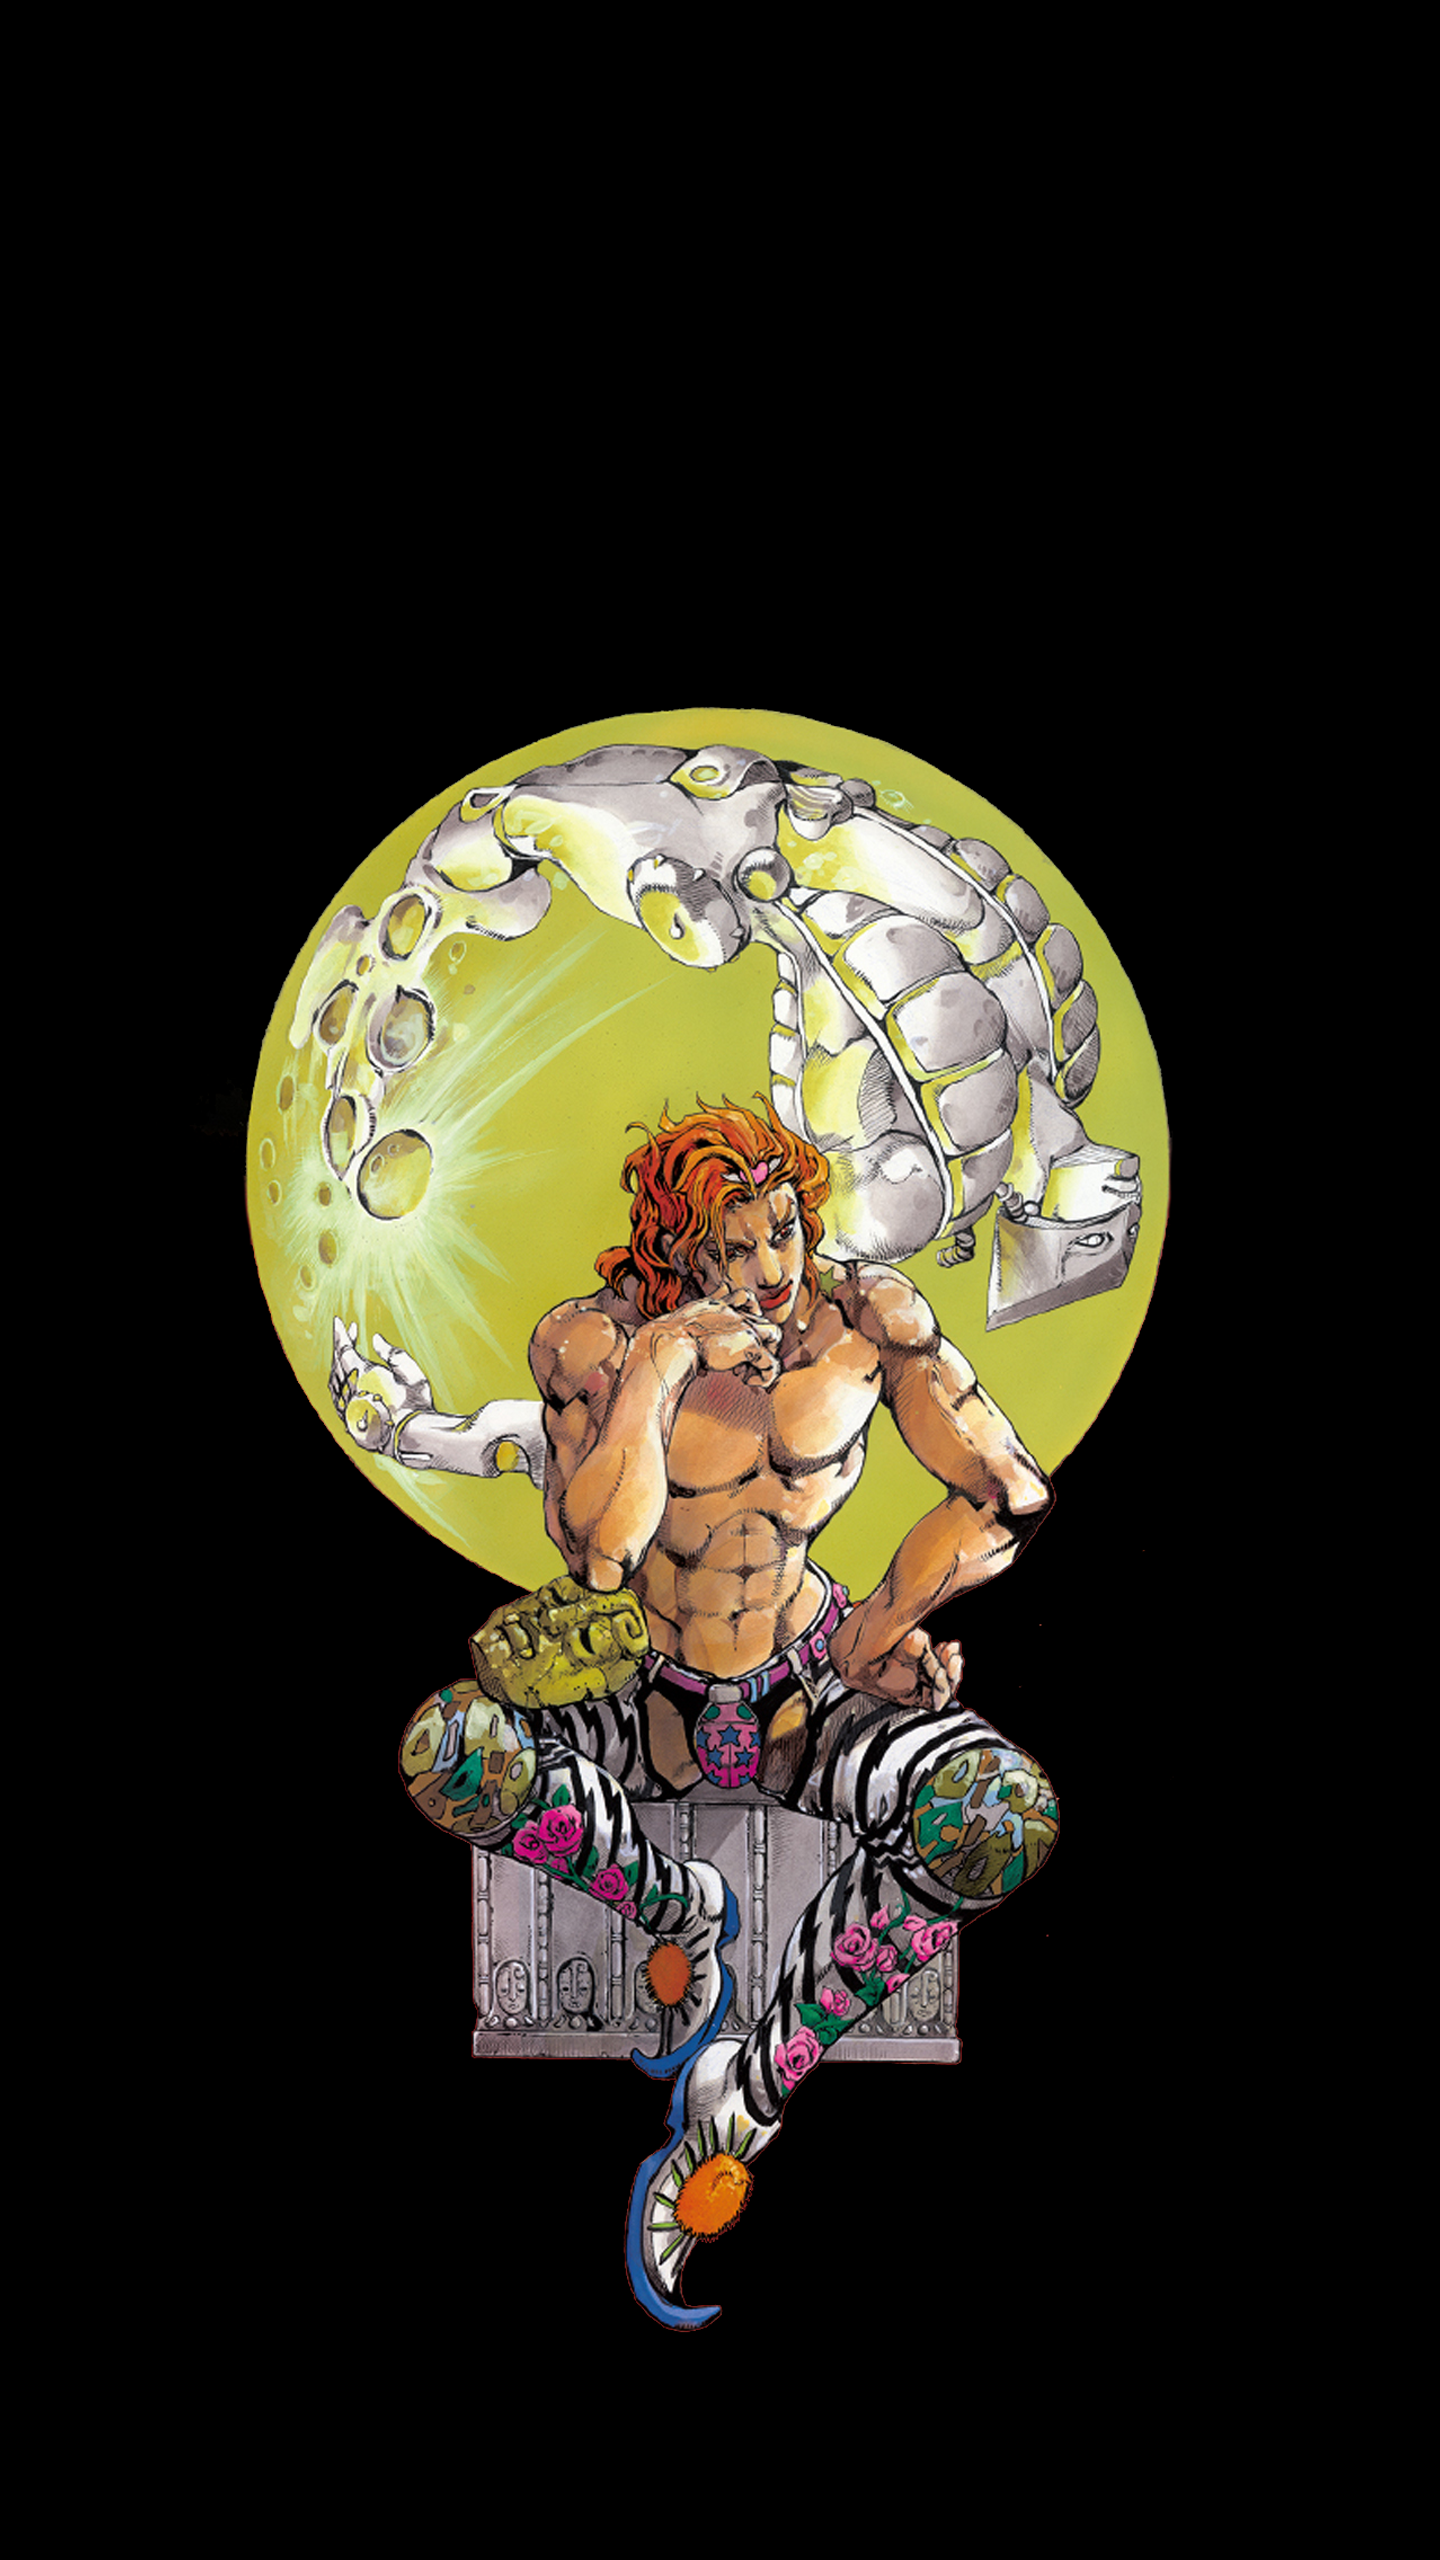 Posting a wallpaper until stone ocean is animated day 1: DIO